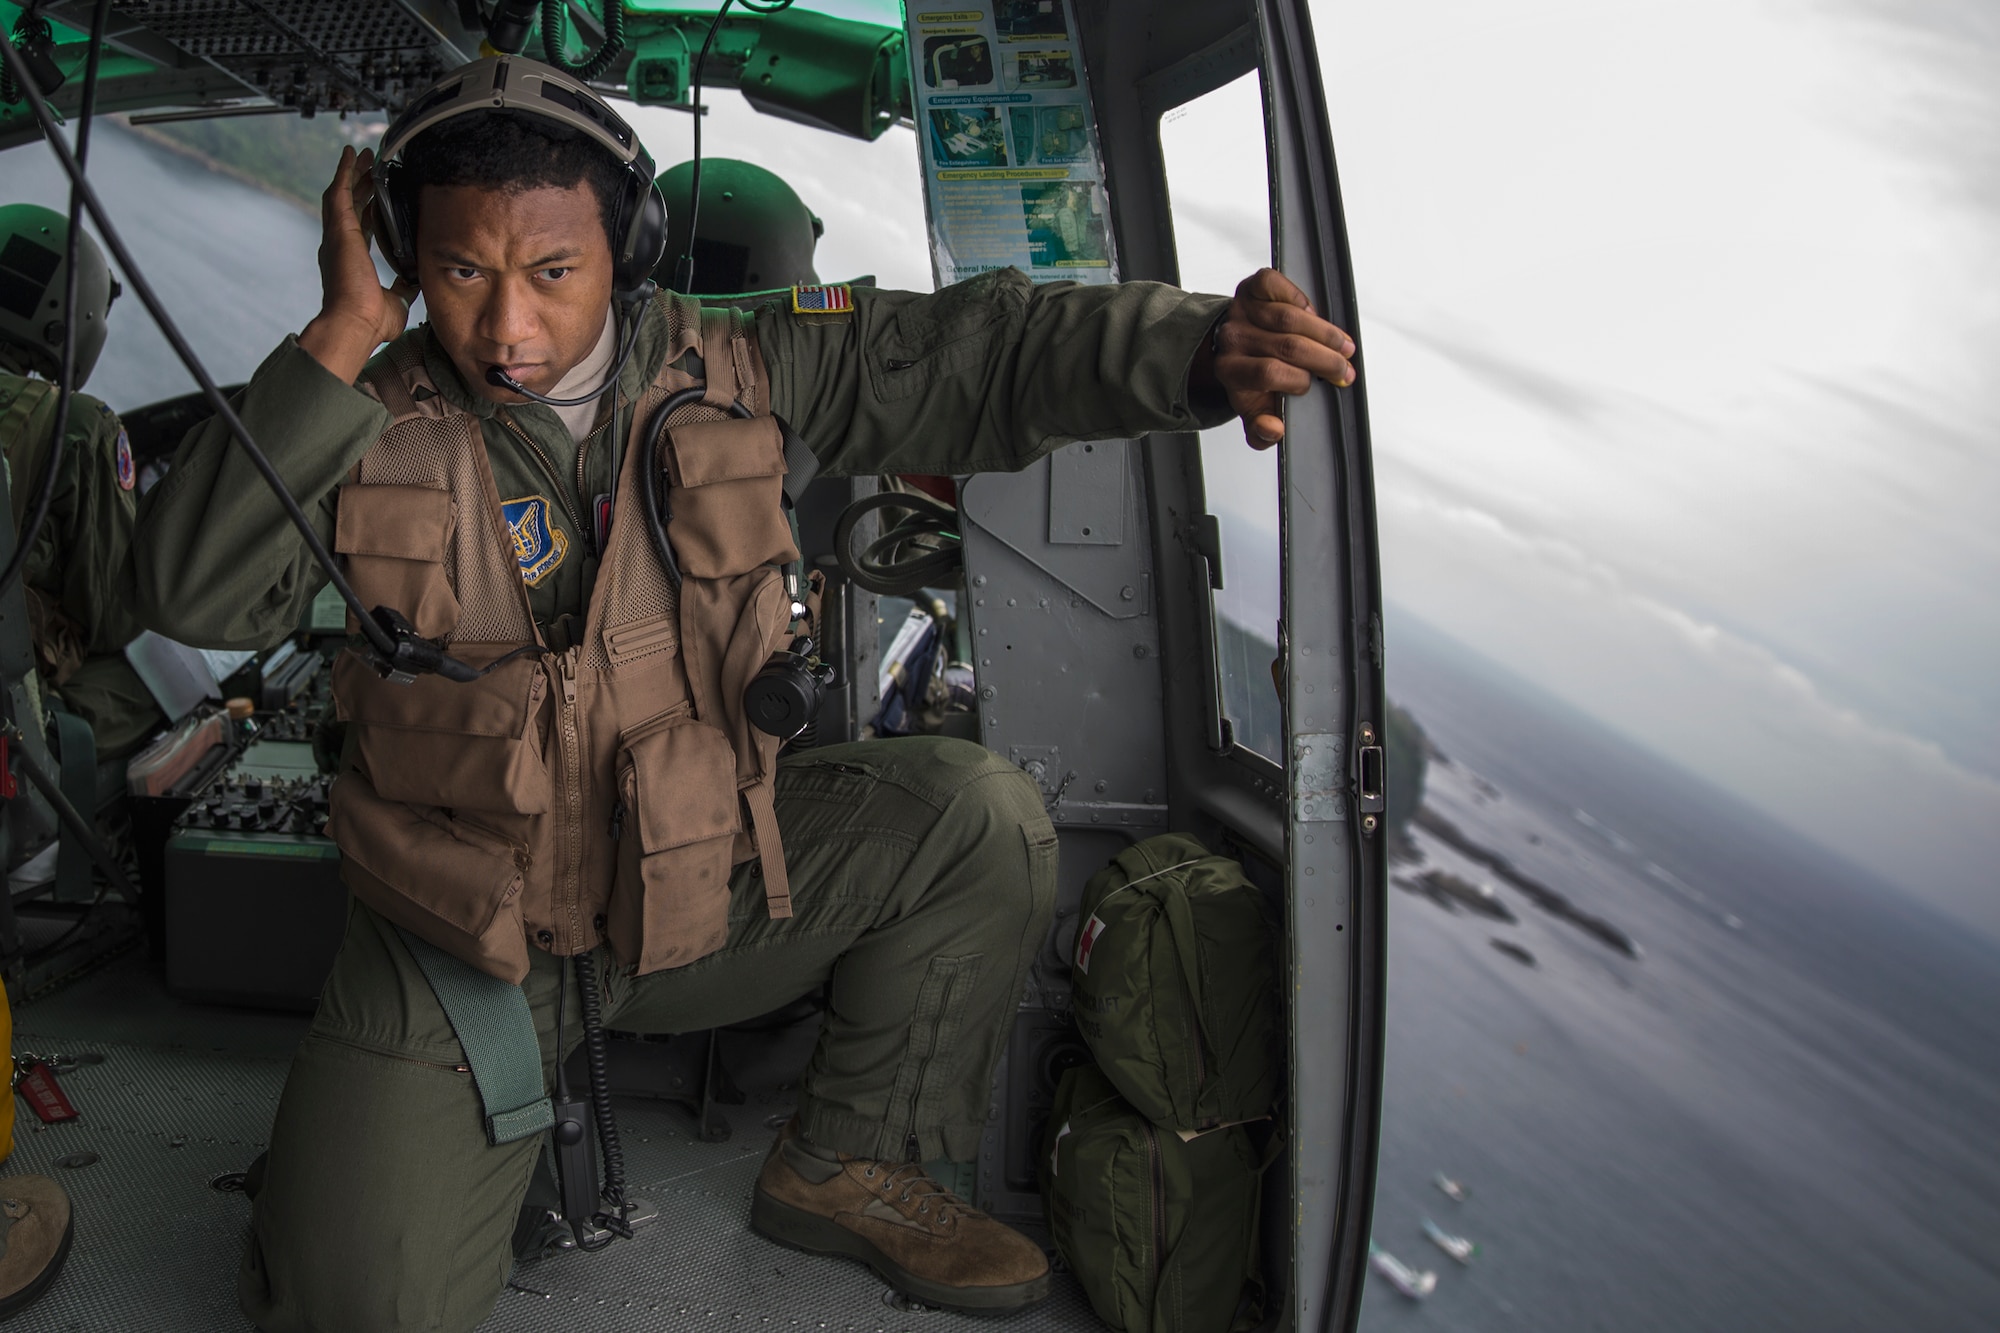 Maj. Zensaku Munn listens to the radio Aug. 31, 2014, during the Shizuoka Comprehensive Disaster Drill over Shimoda bay, Japan. Munn relayed drop clearance to the inbound C-130 Hercules from a UH-1N Iroquois during the drill. Munn is a 374th Operations Support Squadron air mobility liaison officer. (U.S. Air Force photo/Osakabe Yasuo) 